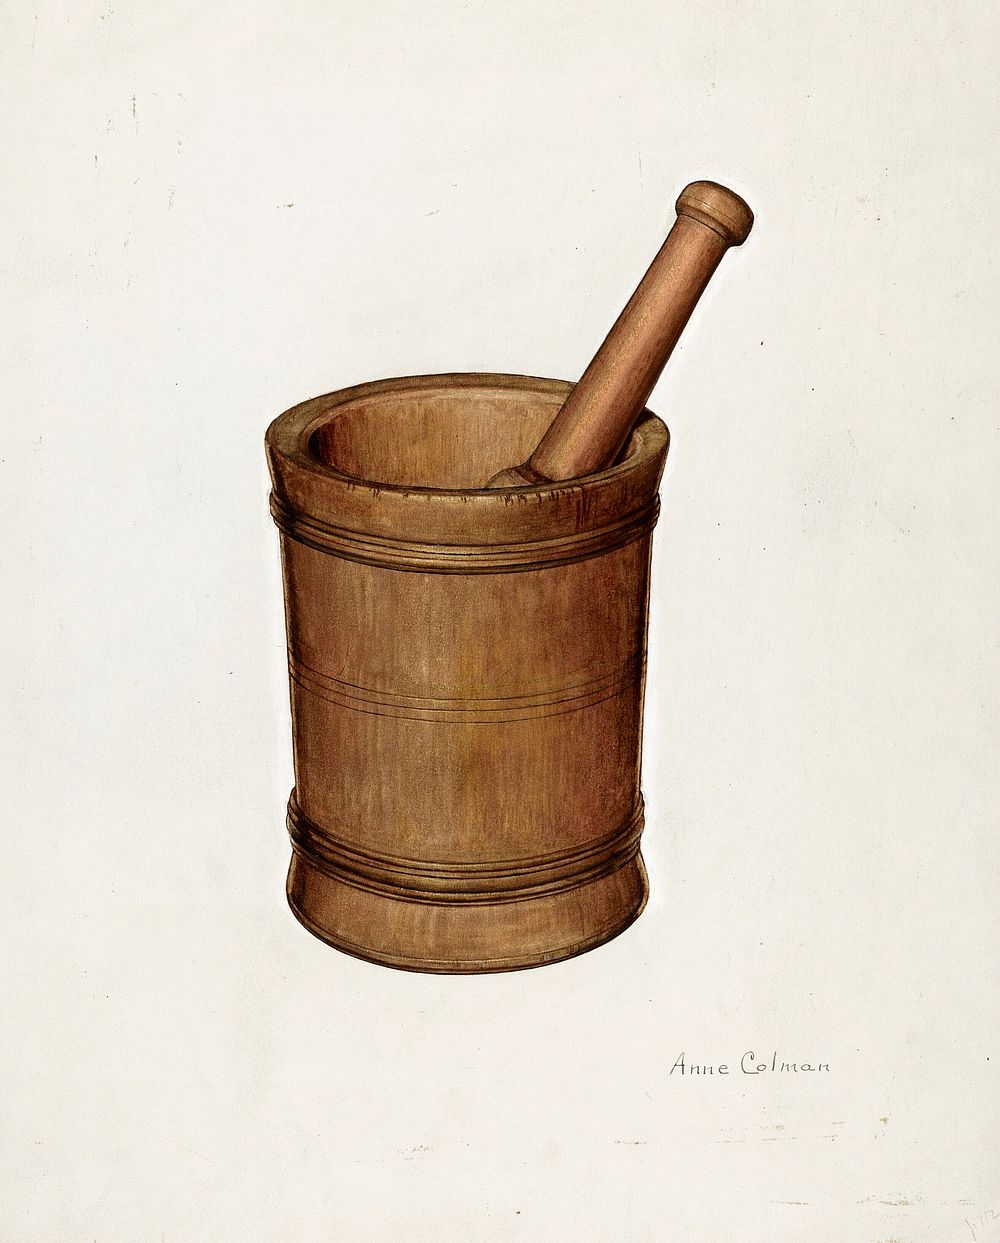 Mortar and Pestle (ca. 1938) by Anne Colman. Original from The National Gallery of Art. Digitally enhanced by rawpixel.